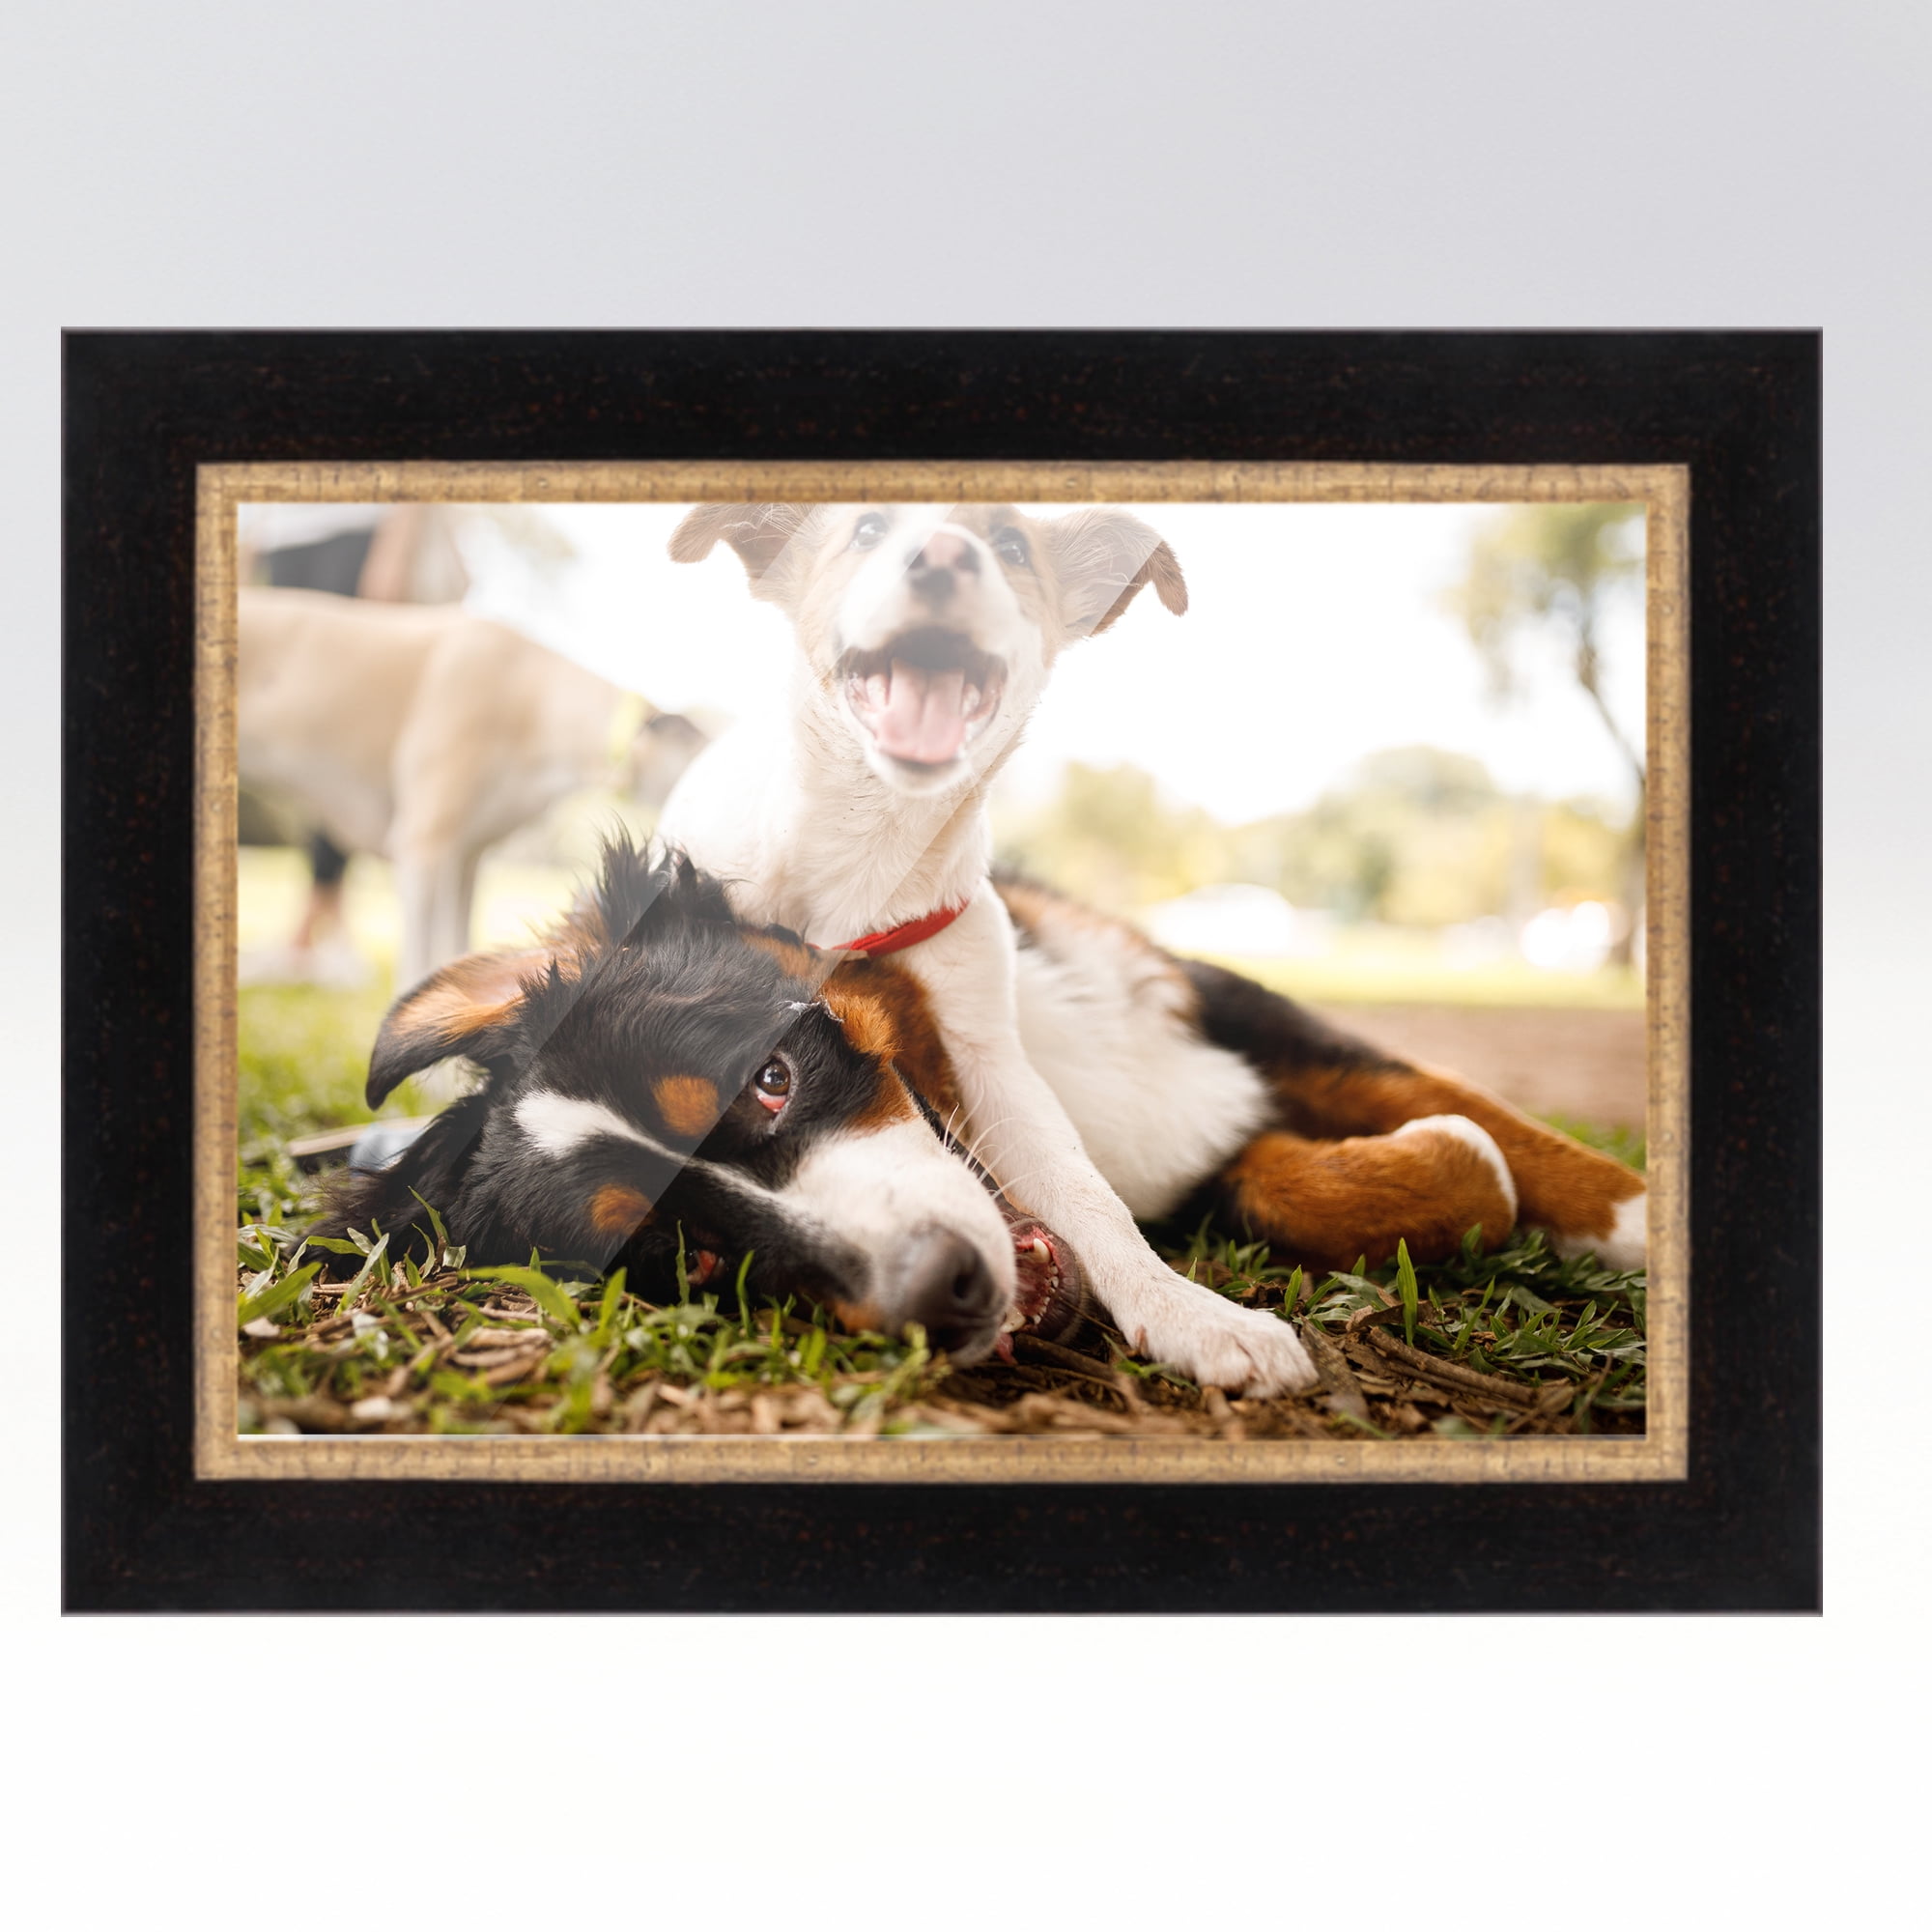 16x24 Frame Gold Real Wood Picture Frame Width 2.25 inches